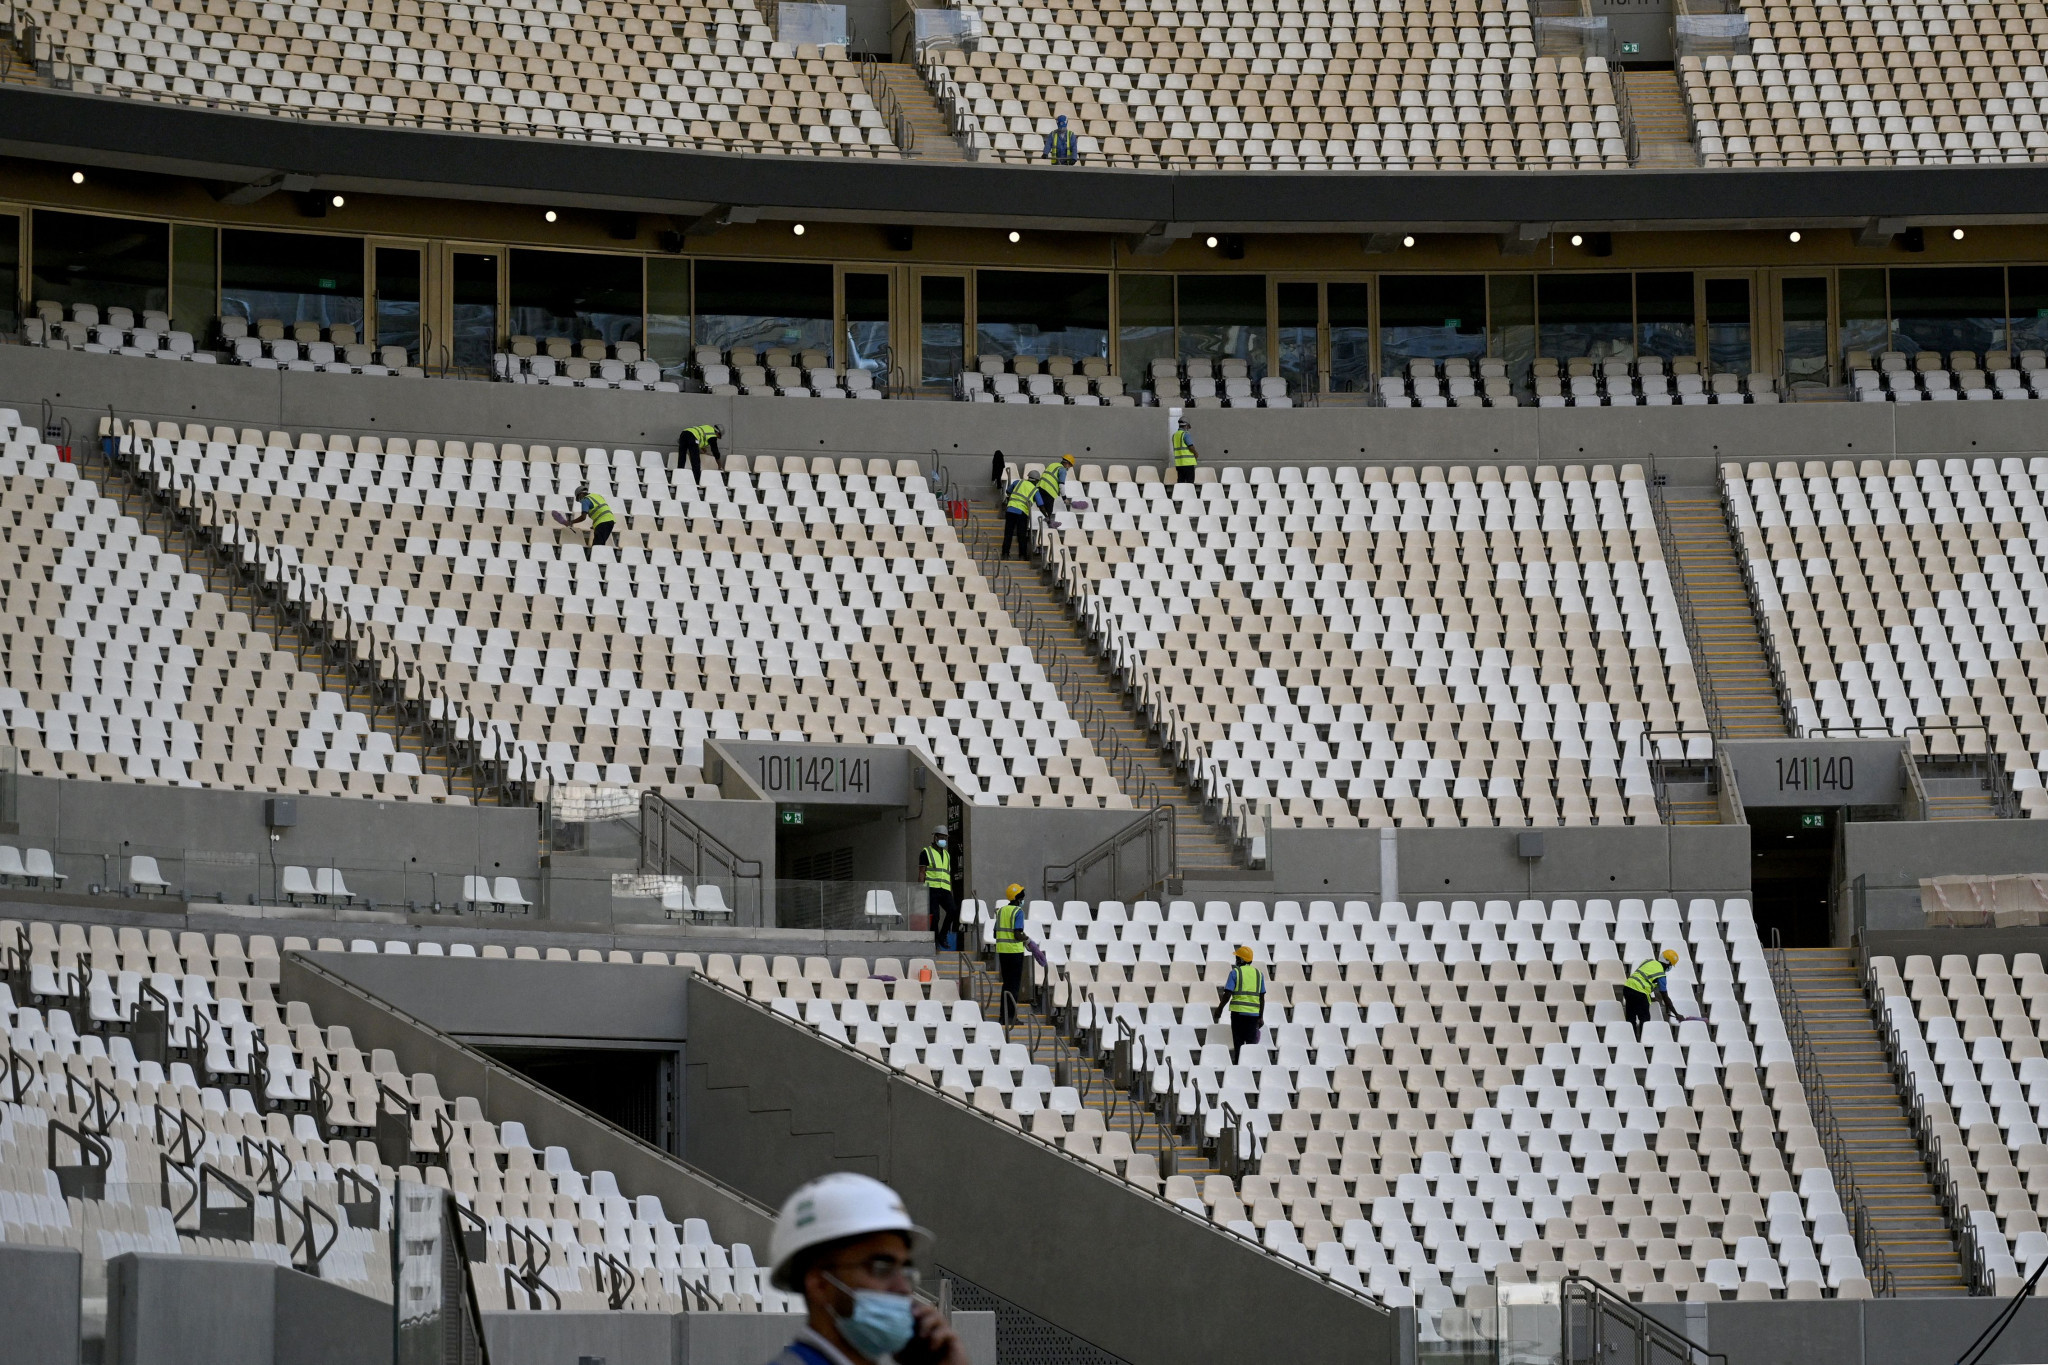 Qatar's stance on workers' rights has been among the dominant issues in the build-up to the FIFA World Cup ©Getty Images